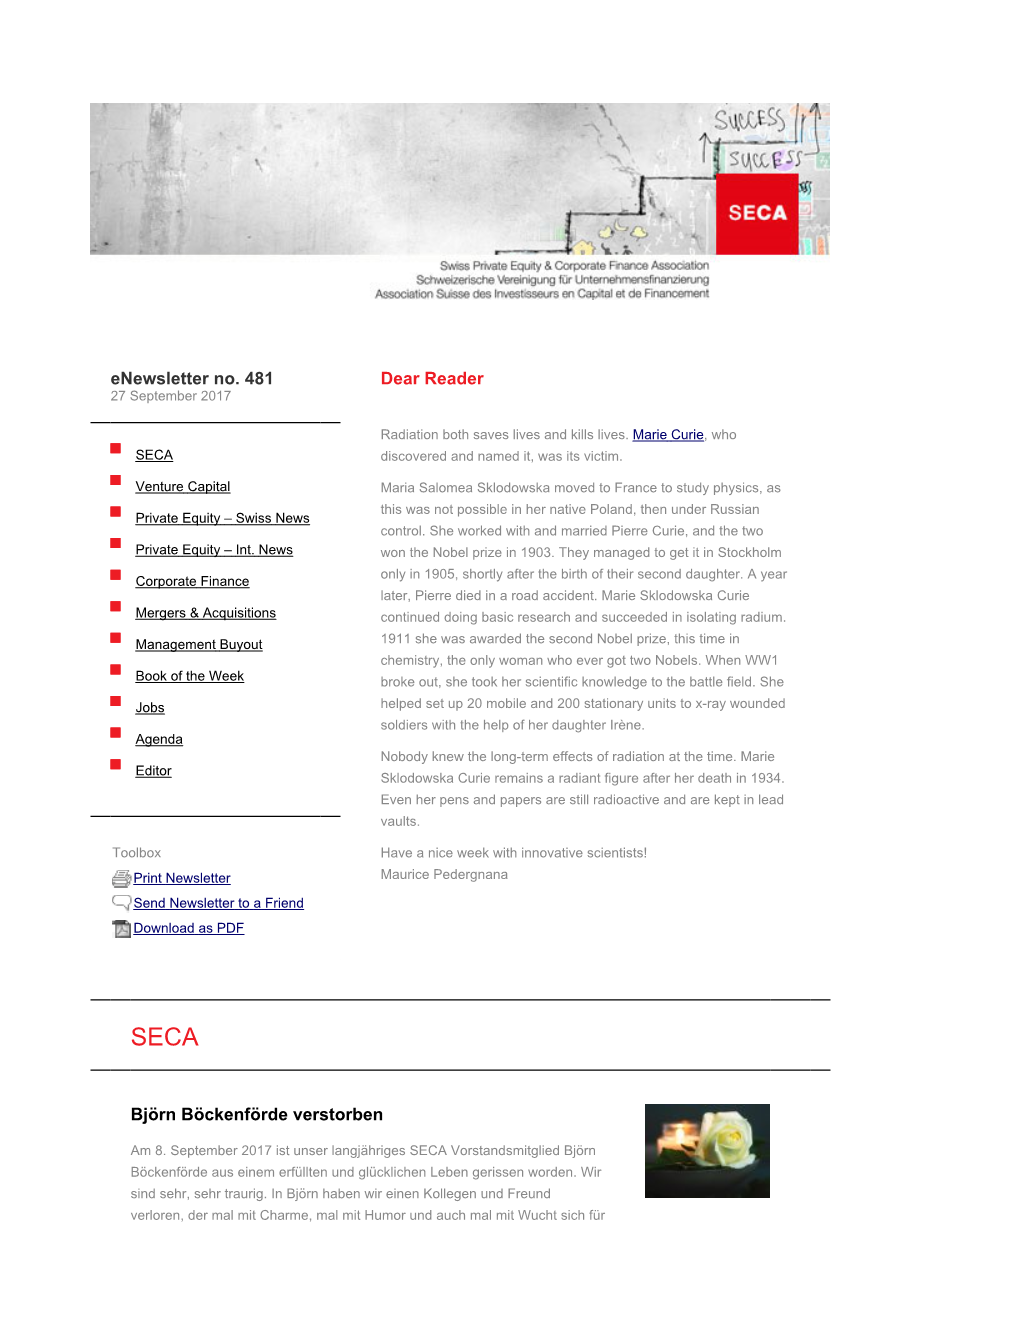 Enewsletter No. 481 | SECA | Swiss Private Equity & Corporate Finance